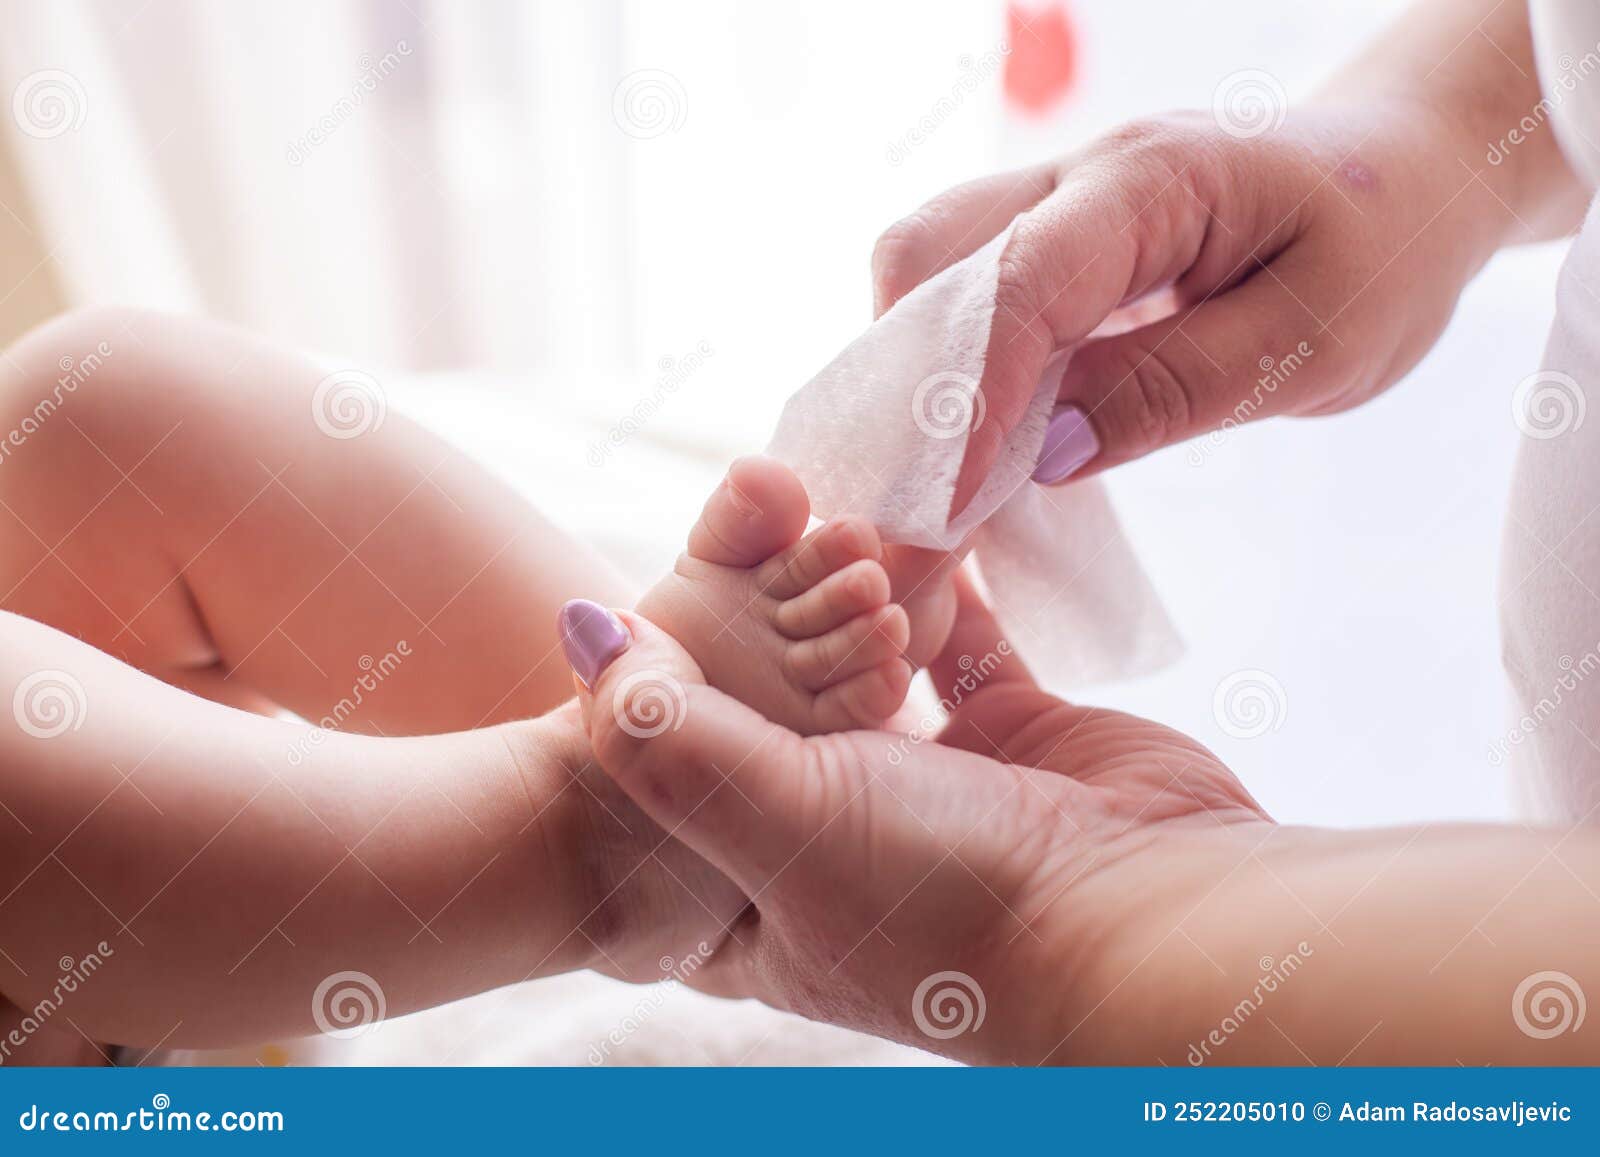 the mother takes care of the baby skin and wipes the baby`s feet with wet wipes